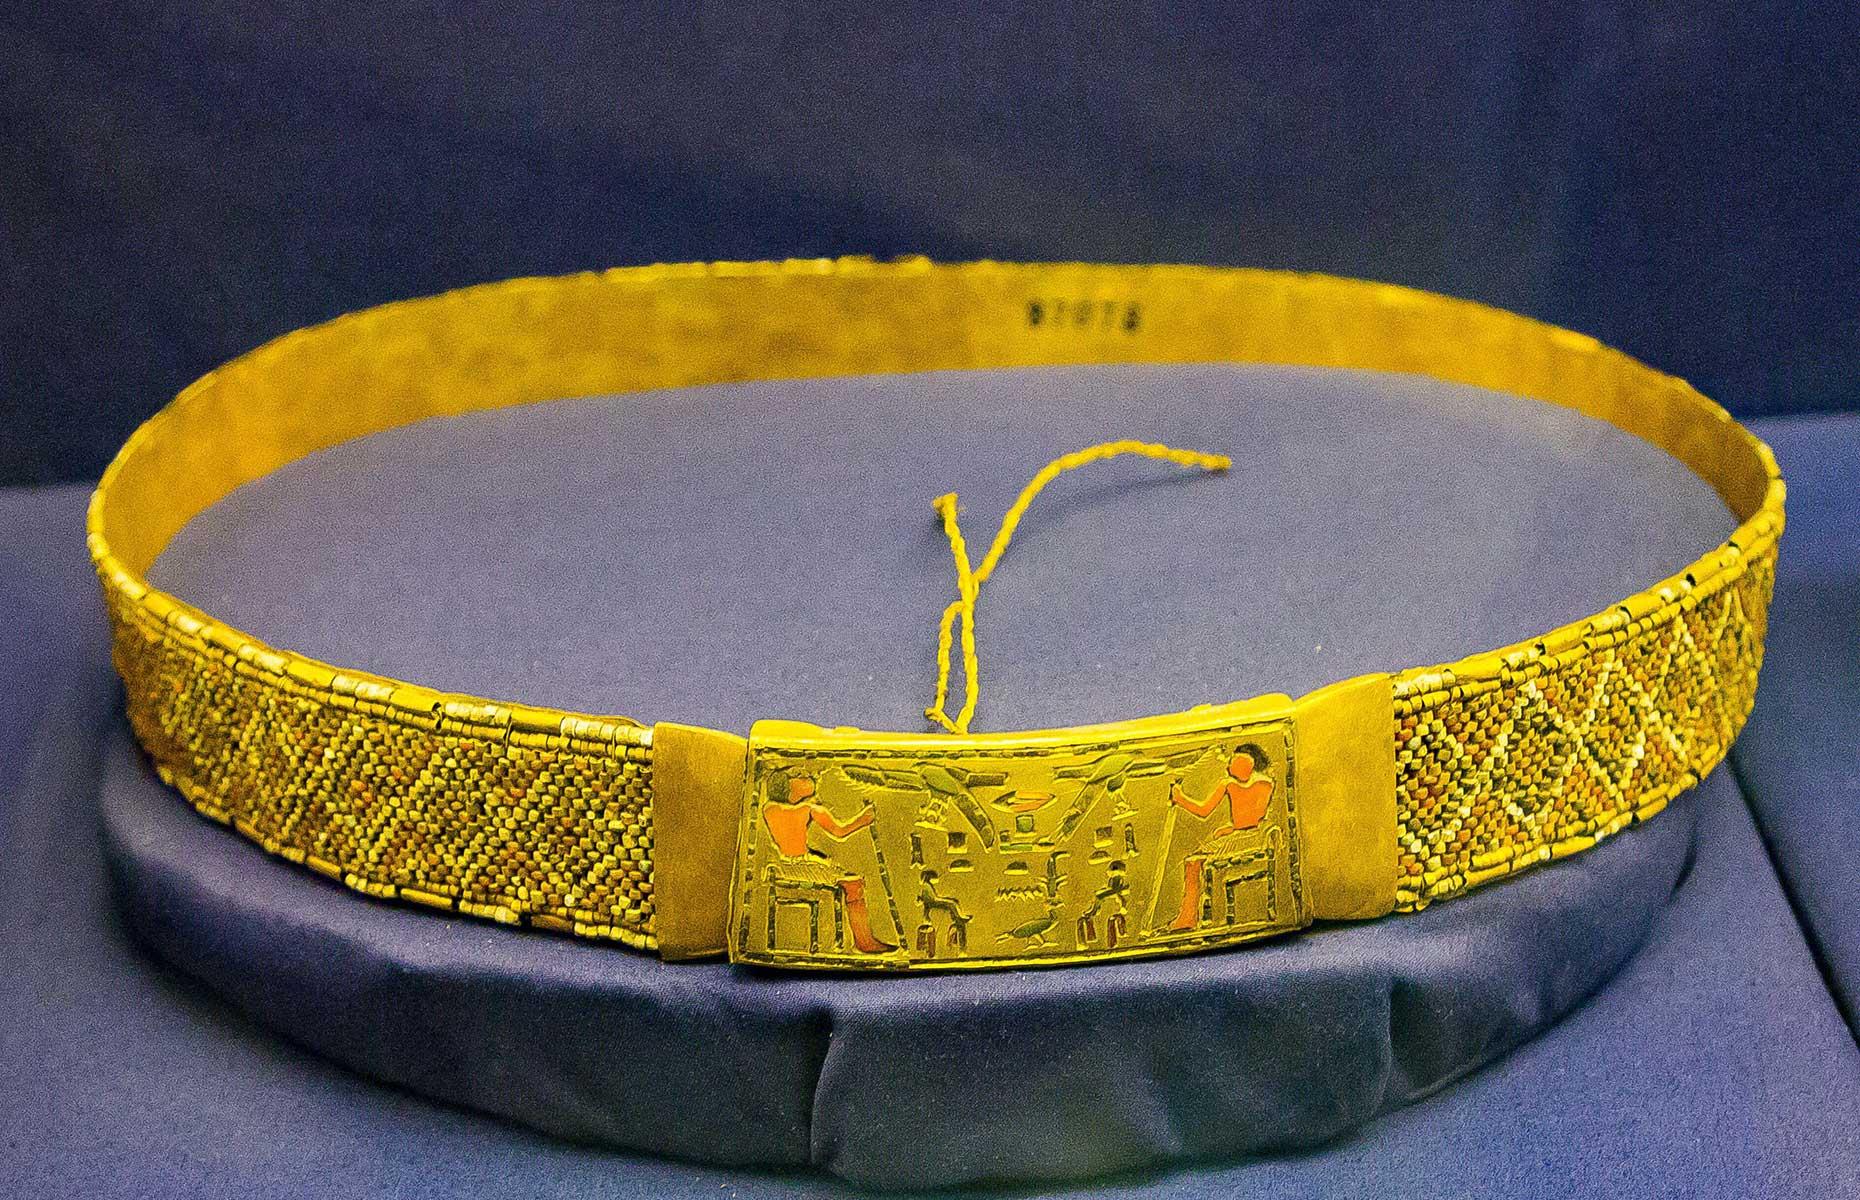 <p>Also found at the Saqqara site was this thin gold band measuring 90cm, placed among the mummy bandages of Prince Ptah-Shepses. Dating back to 2323-2150 BC, red carnelian (gemstone) and volcanic glass beads form angular, geometric patterns, while hieroglyphics are inscribed on the buckle.</p>